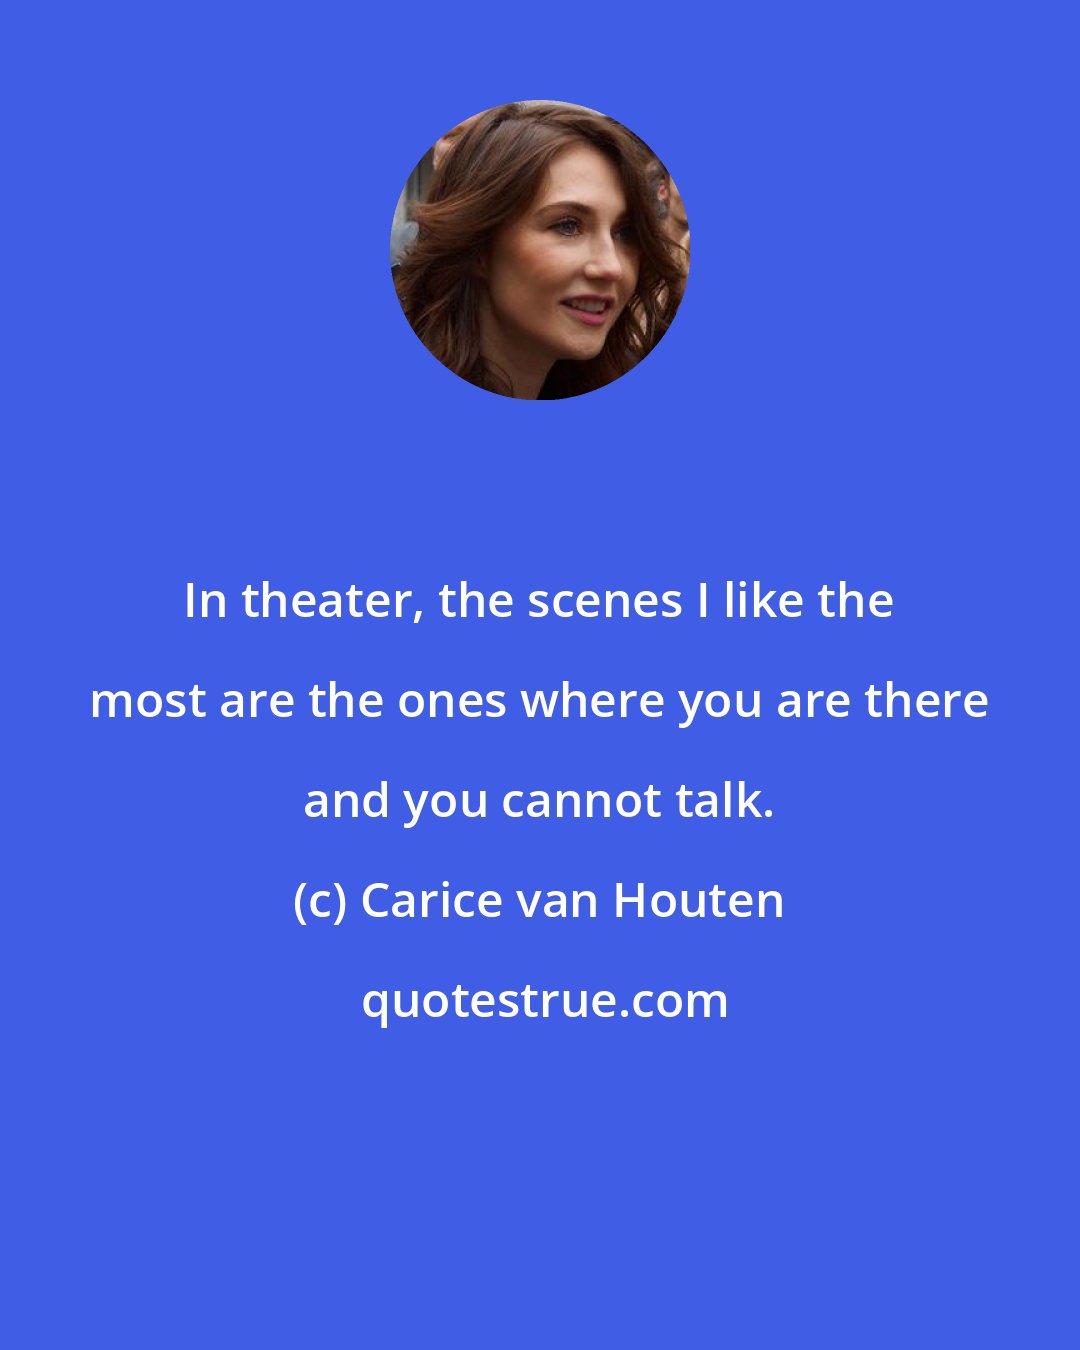 Carice van Houten: In theater, the scenes I like the most are the ones where you are there and you cannot talk.